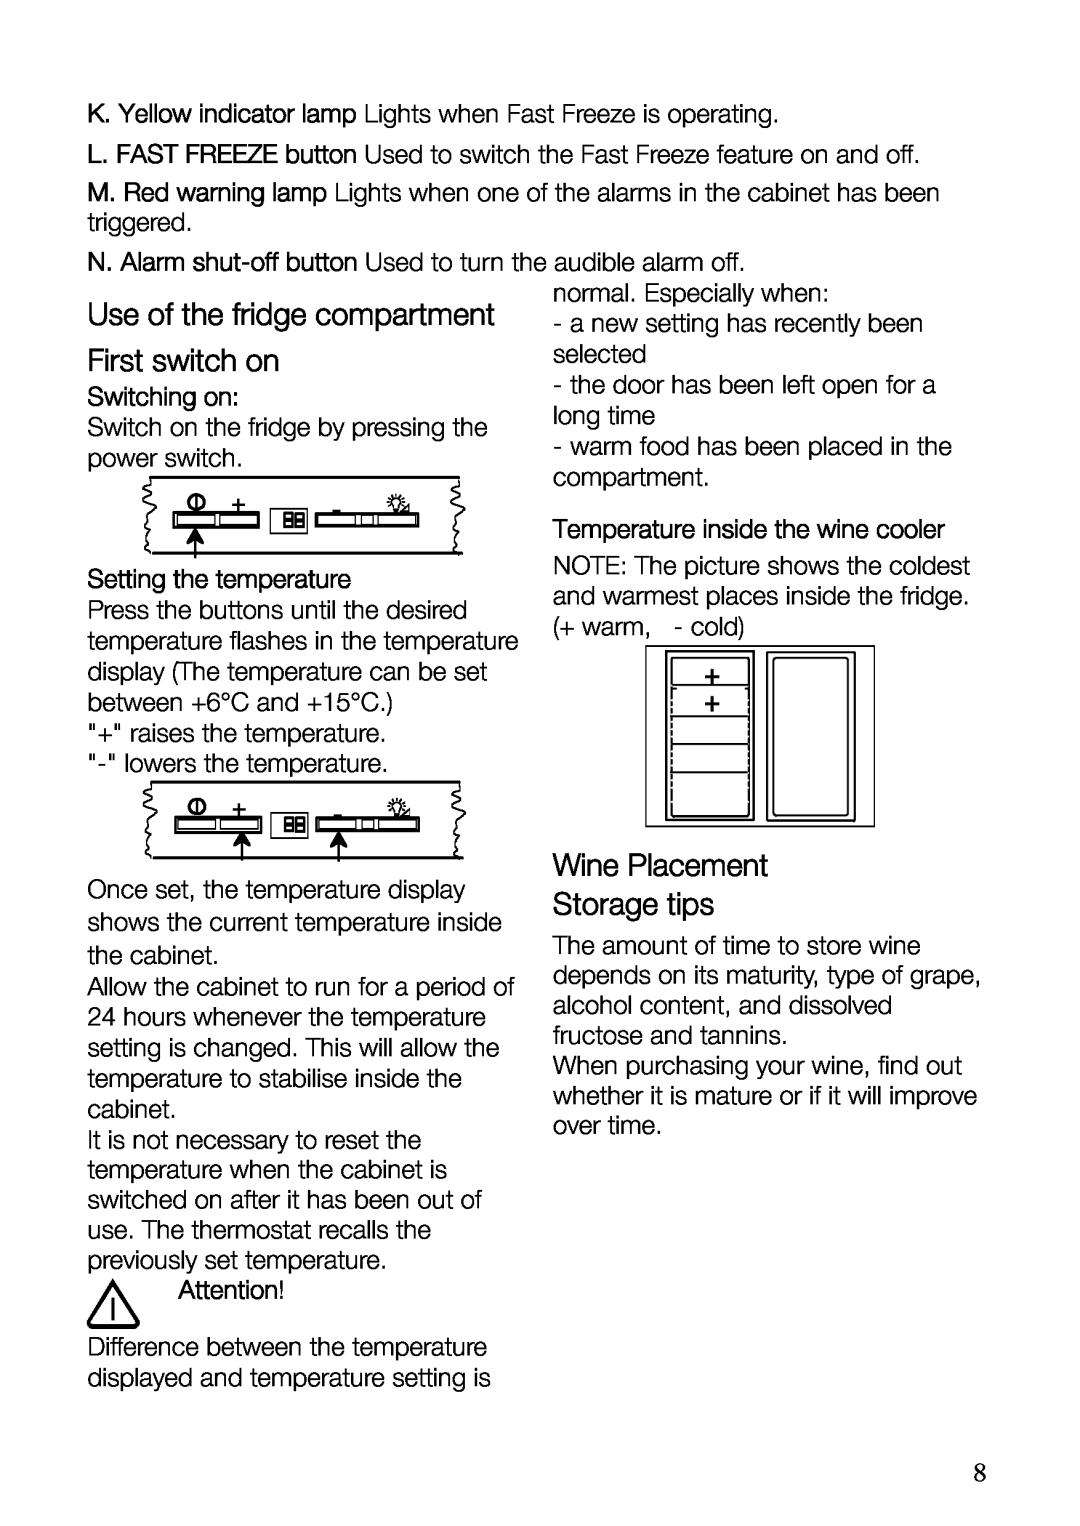 Electrolux ERF37800WX user manual + + Wine Placement Storage tips, Temperature inside the wine cooler 